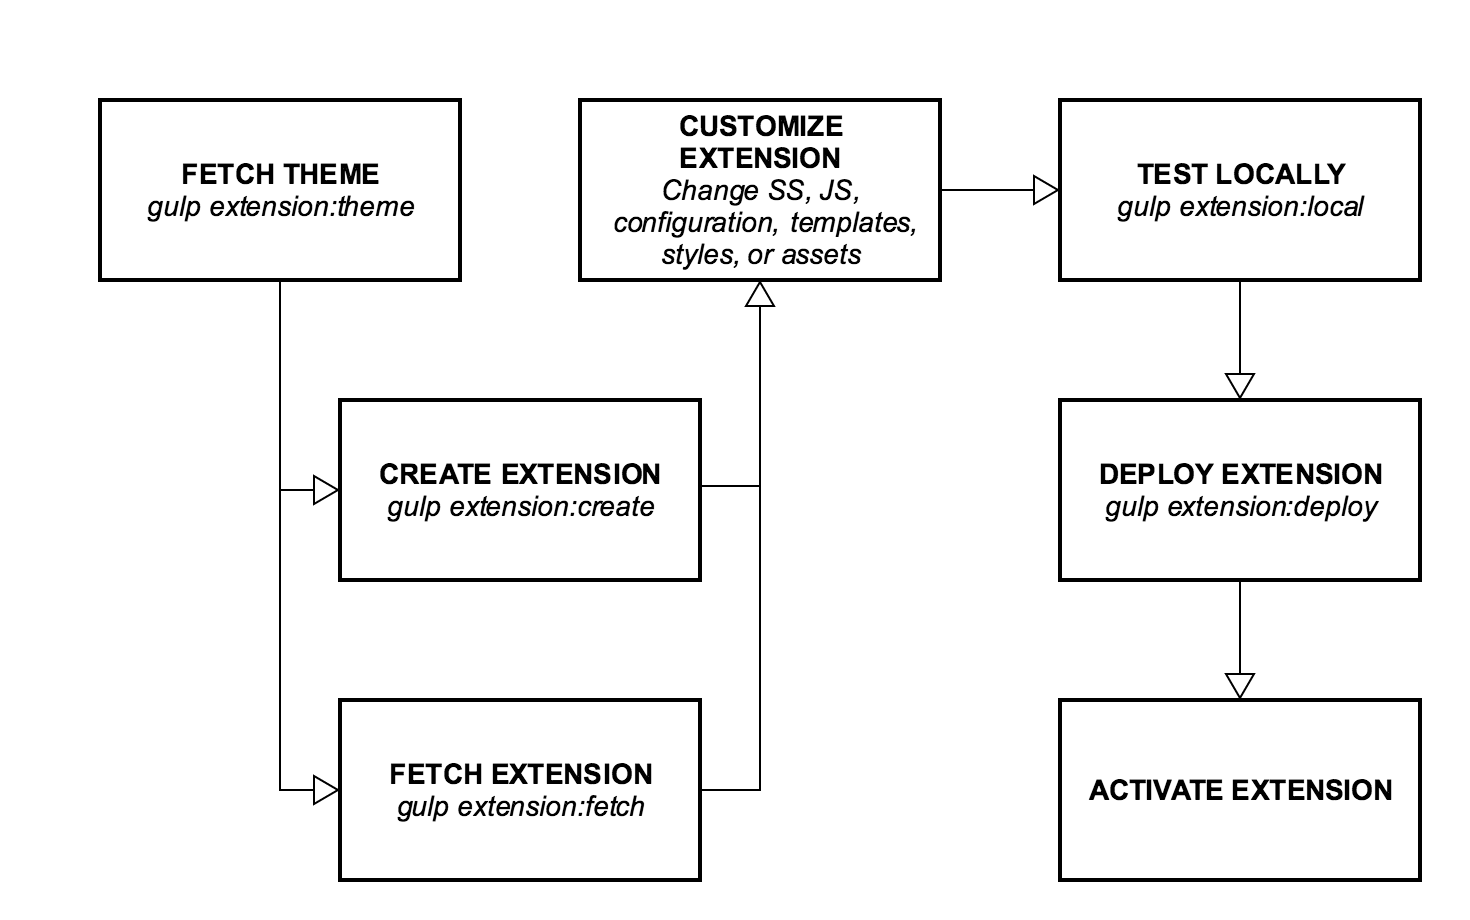 A flow chart illustrating the steps involved in developing an extension